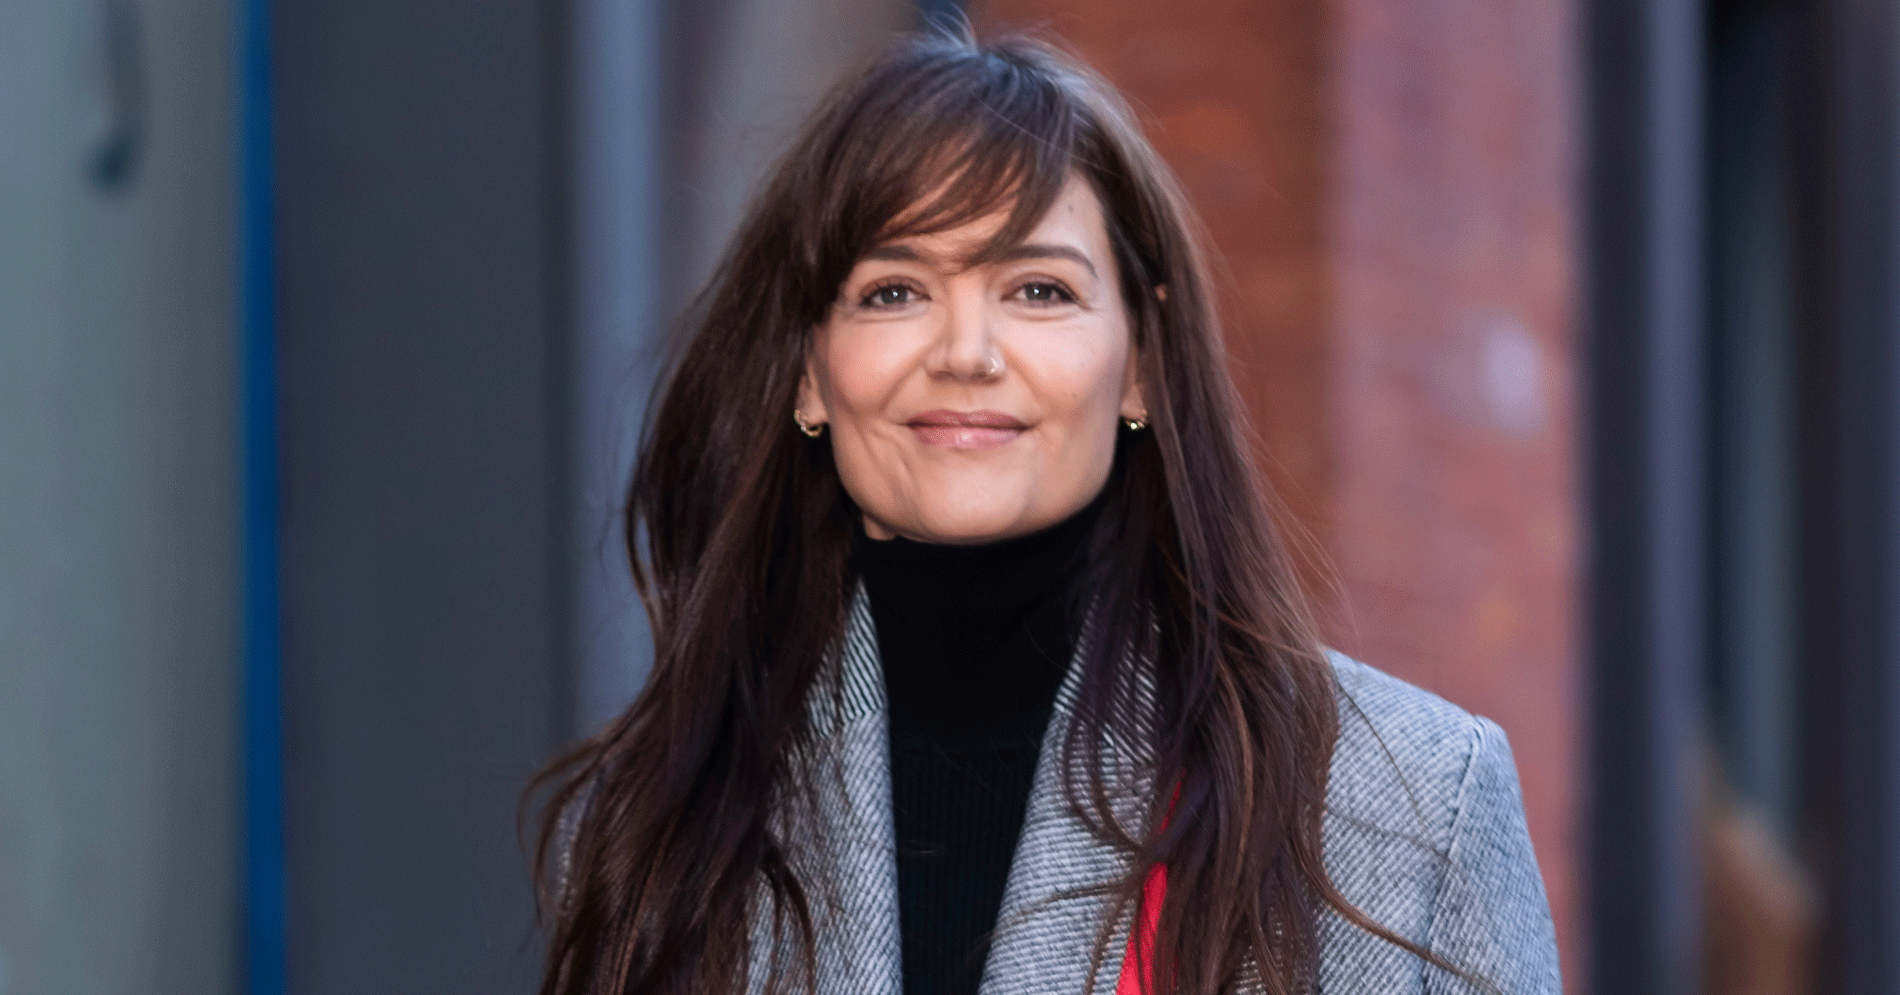 See How Katie Holmes Styled the Camel Coat Trend in NYC